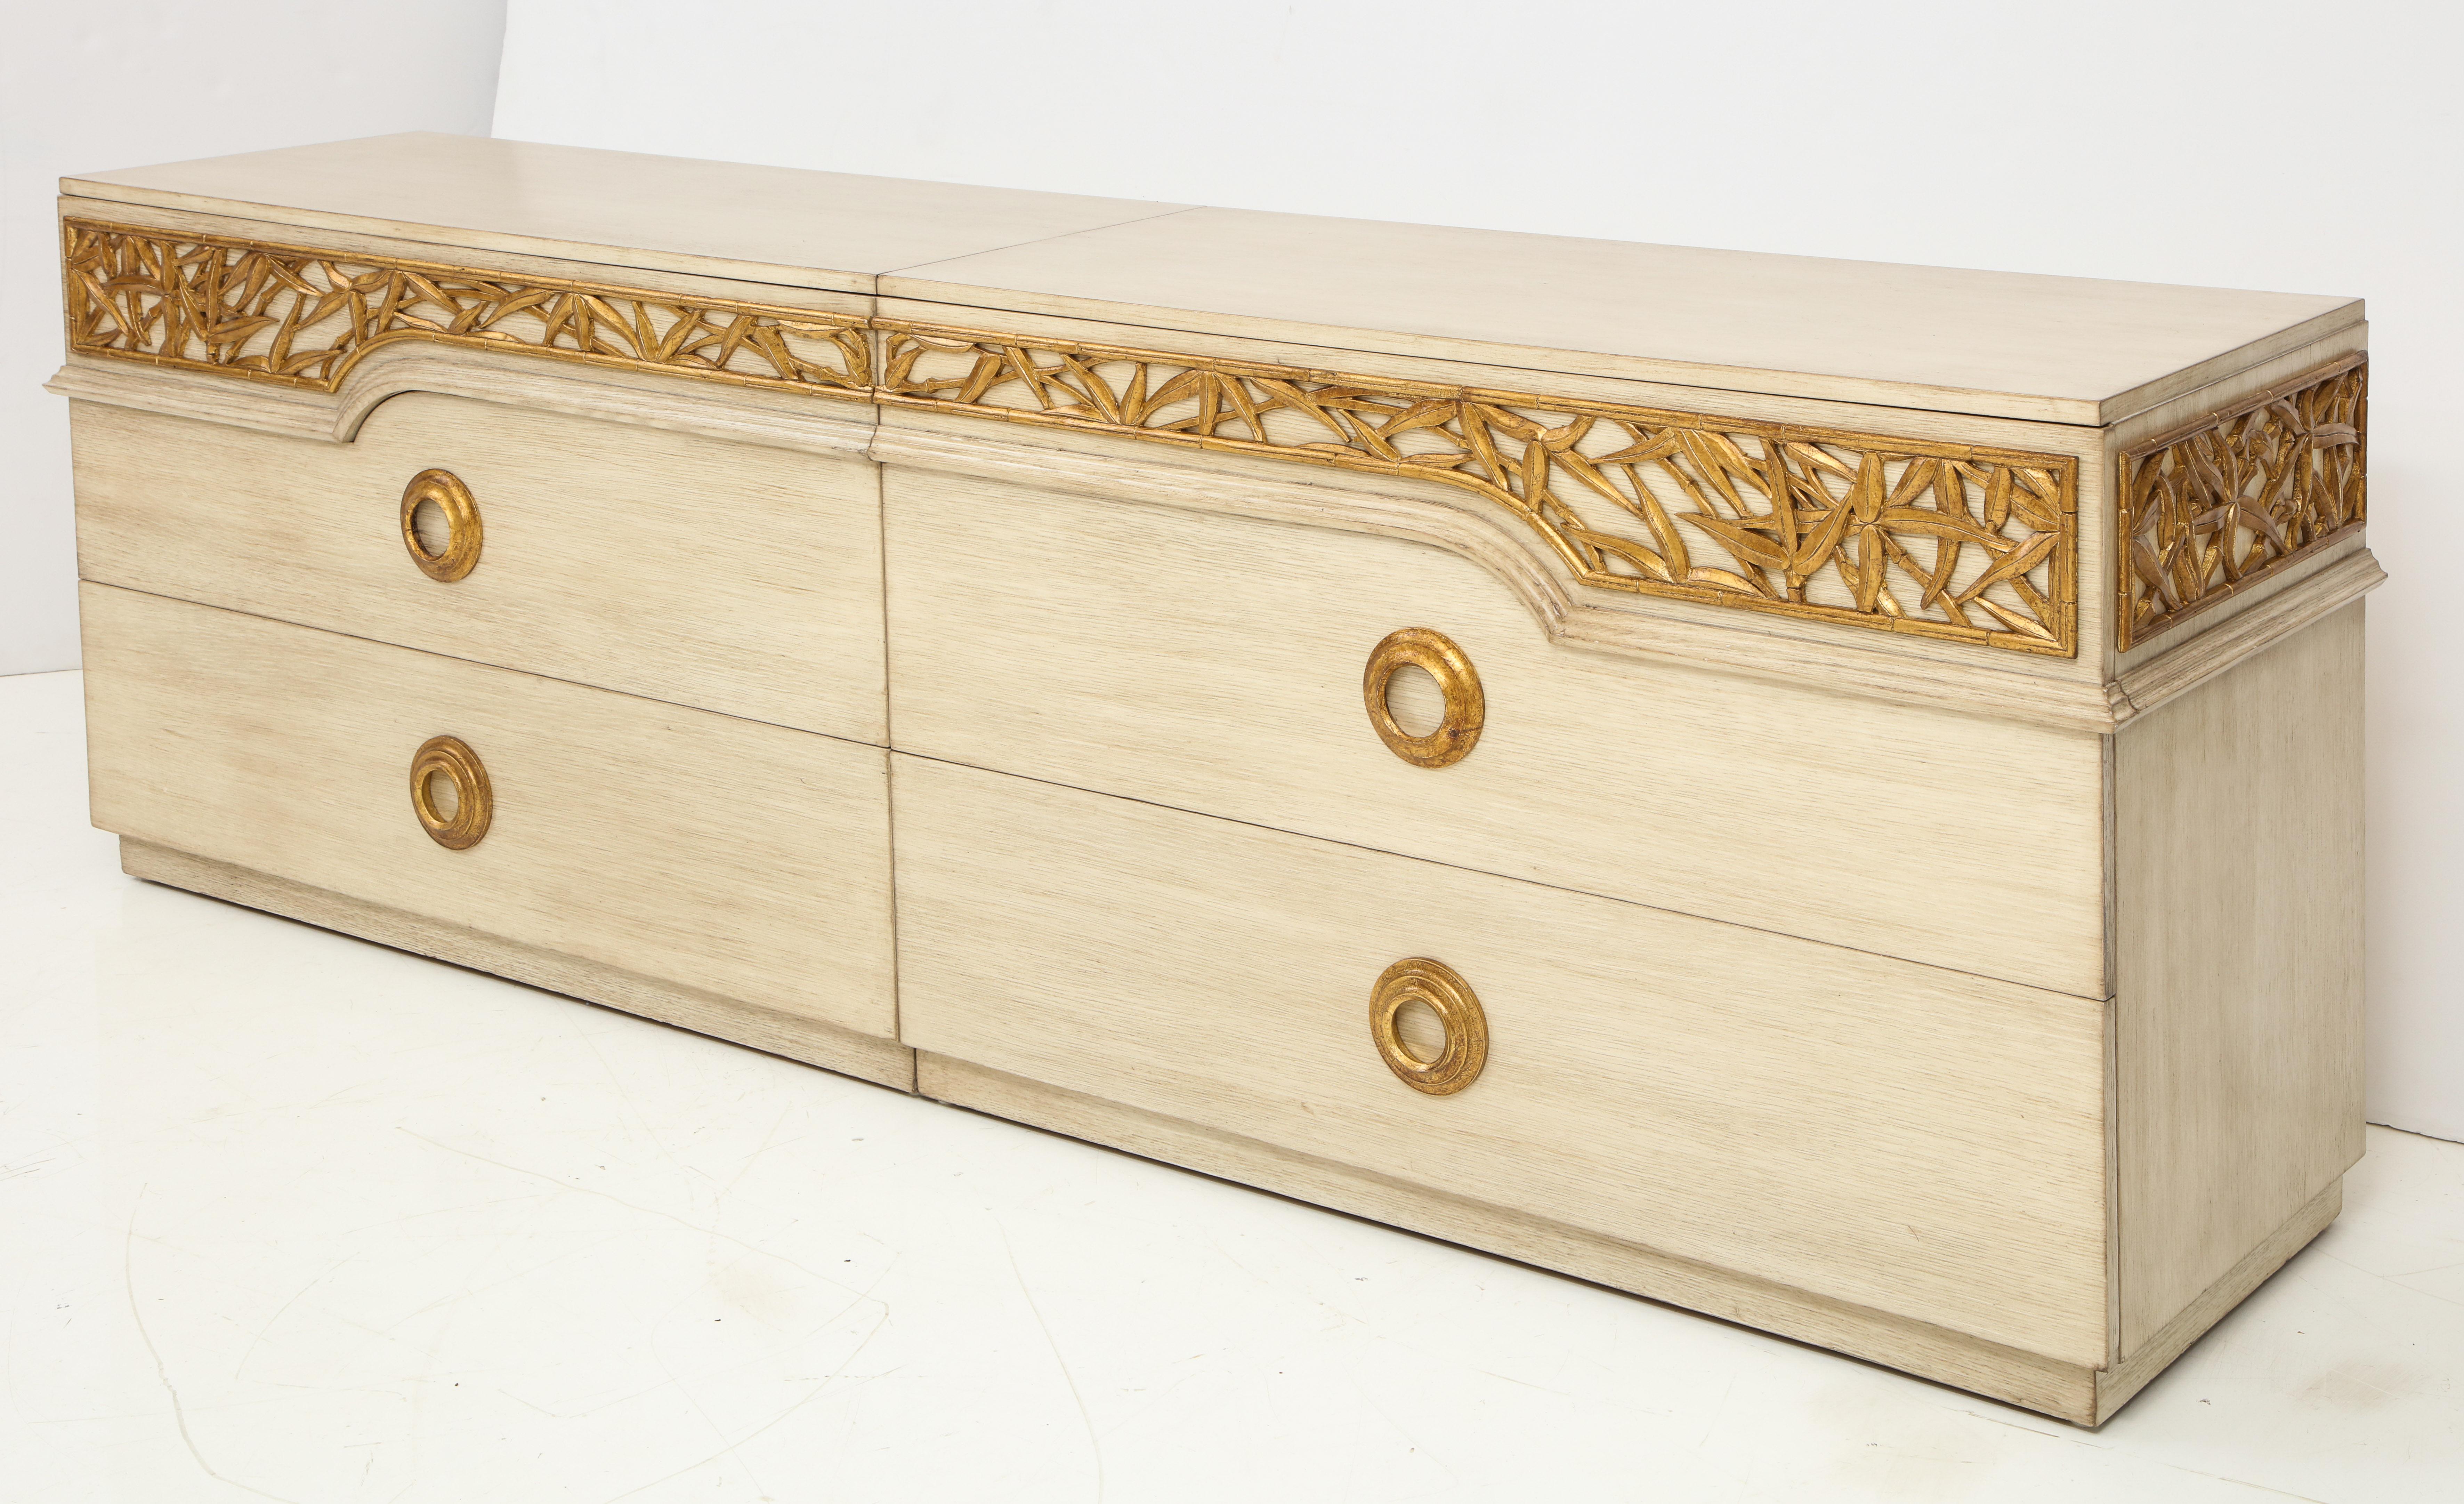 Large bamboo detailed dresser by James Mont.
This large 2-piece cabinet has been restored in a natural driftwood finish and is in Excellent condition and is accented by the beautifully carved gold leaf bamboo detailing.
The cabinet has 6 drawers